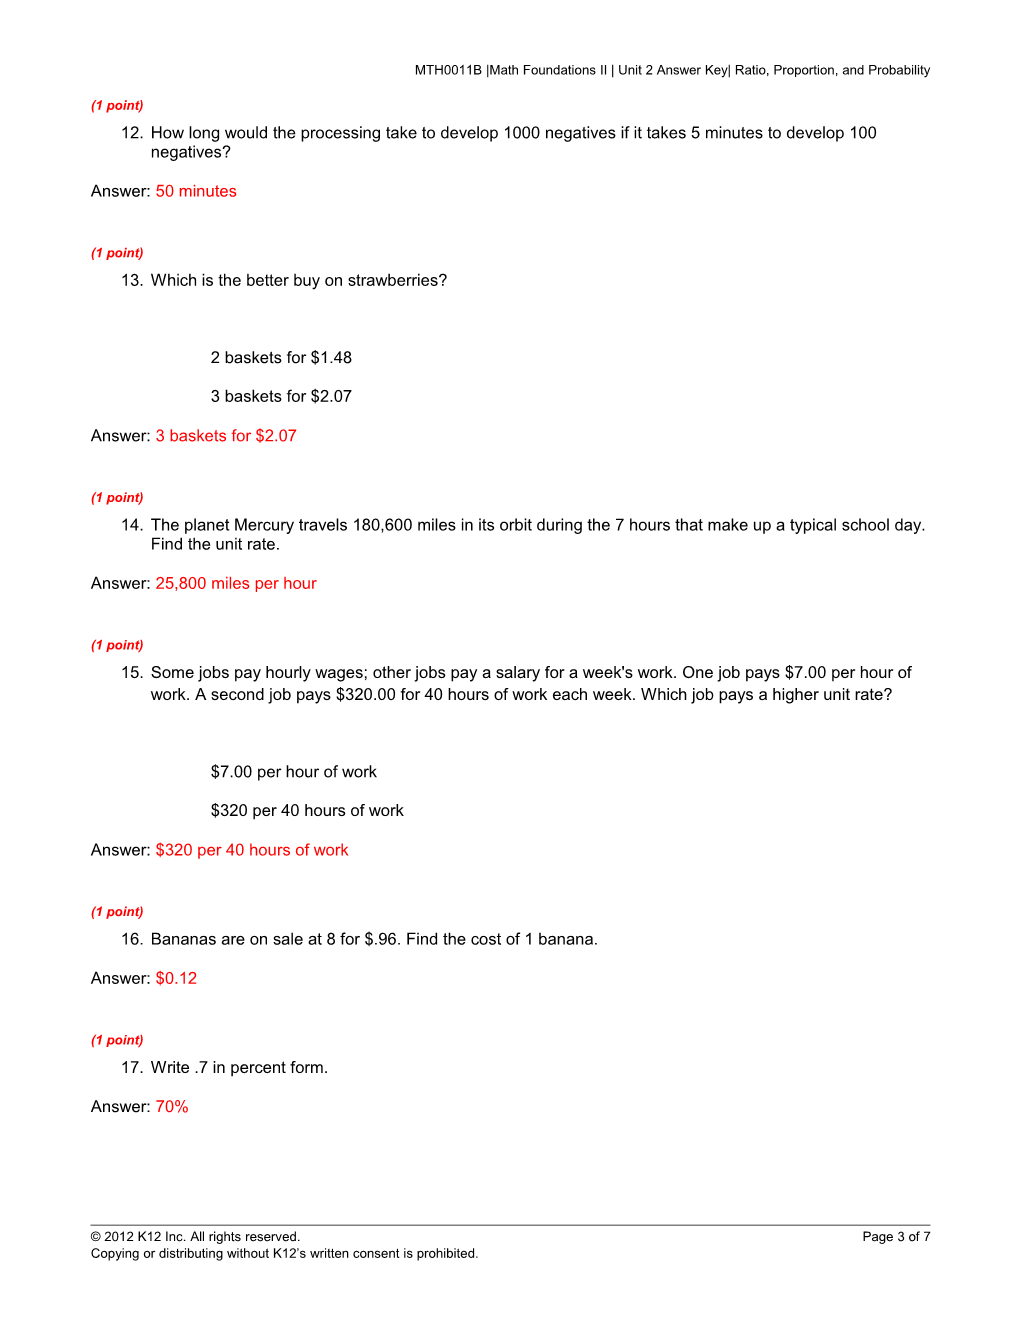 MTH0011B Math Foundations II Unit 2Answer Key Ratio, Proportion, and Probability